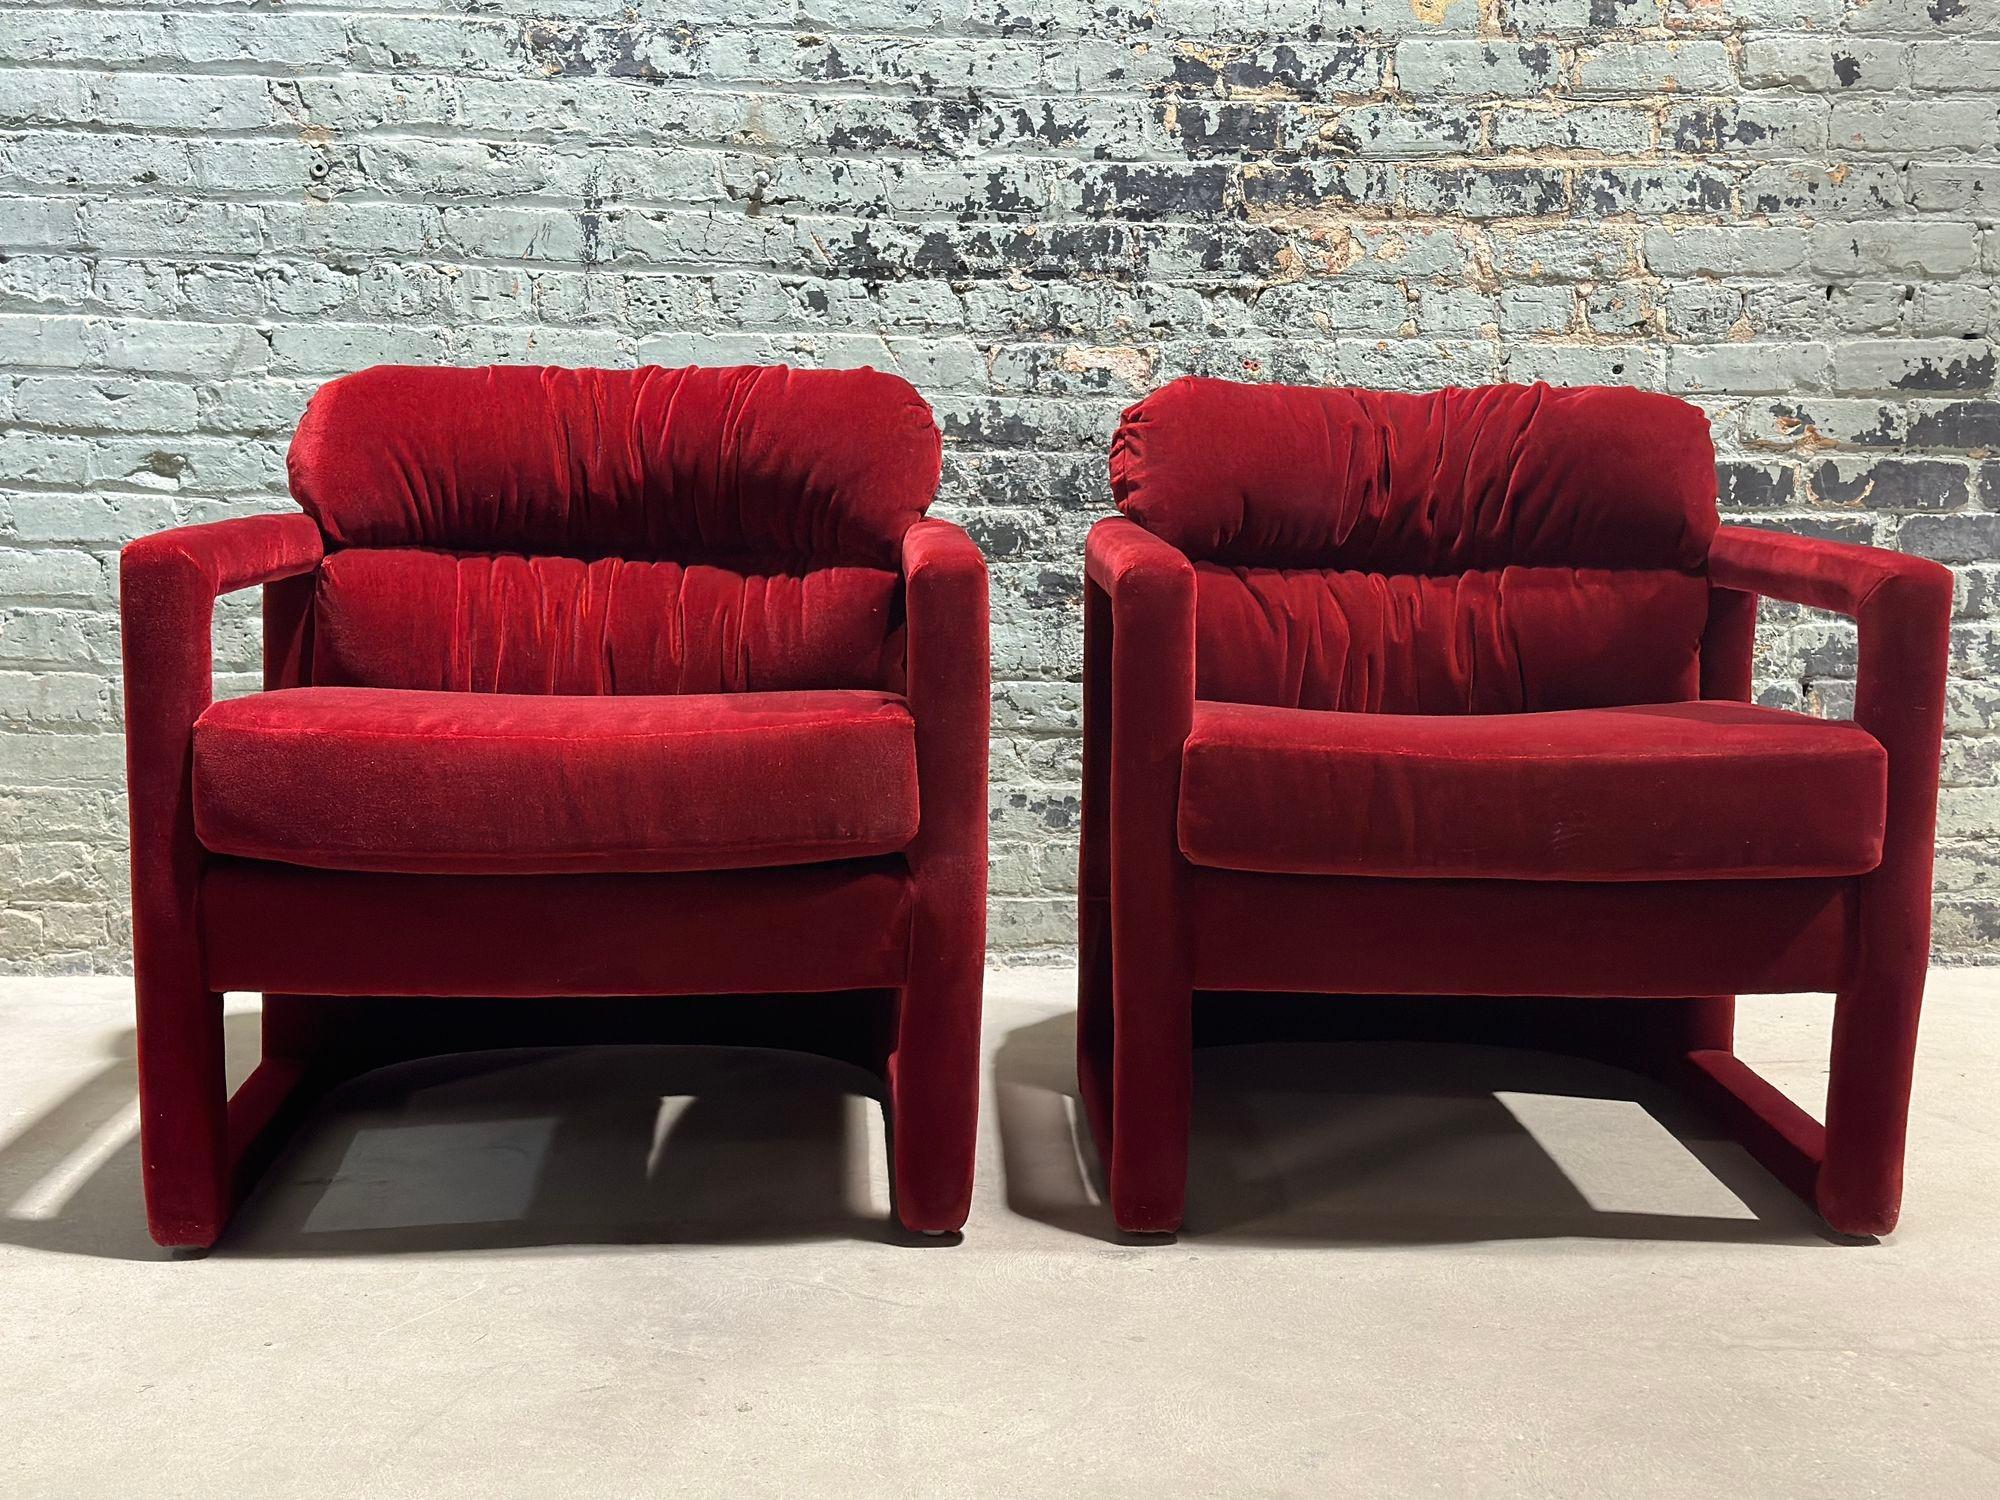 Sculptural Parsons Open Arm Lounge Chairs, 1970's. Newly reupholstered in a dual tone red with orange backing velvet.
Measure 30